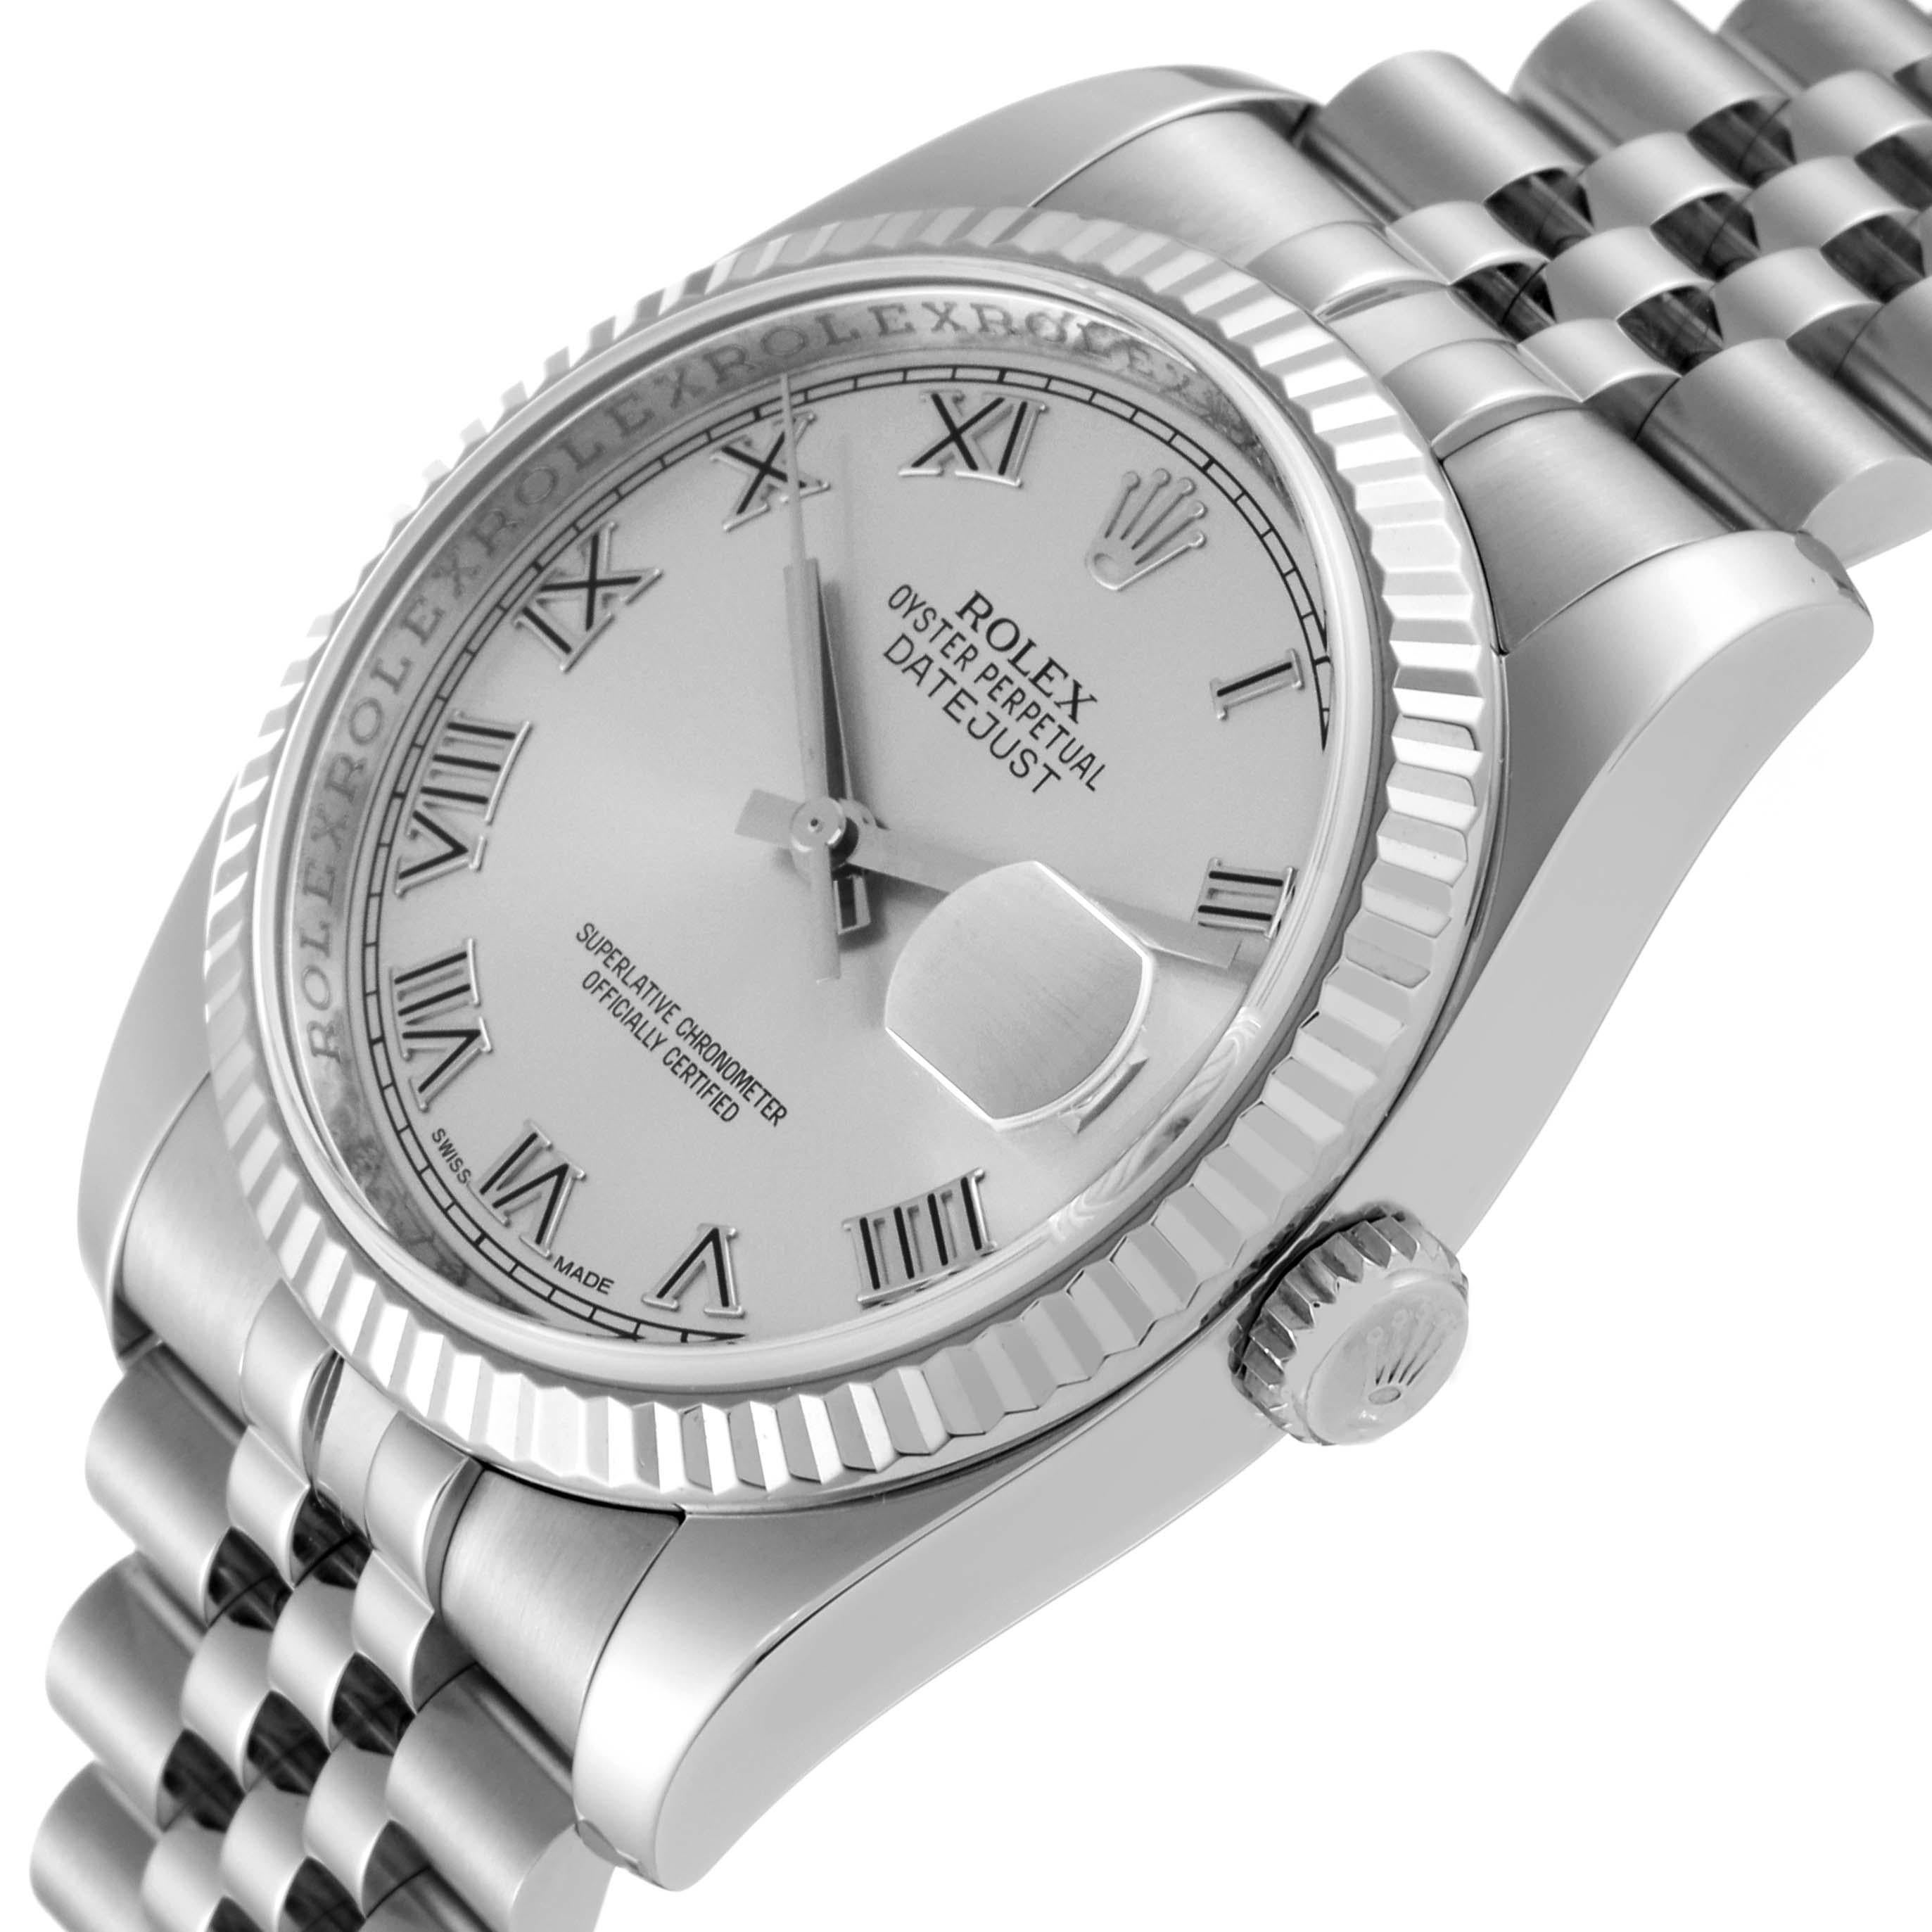 Rolex Datejust Steel White Gold Silver Roman Dial Mens Watch 116234 For Sale 3